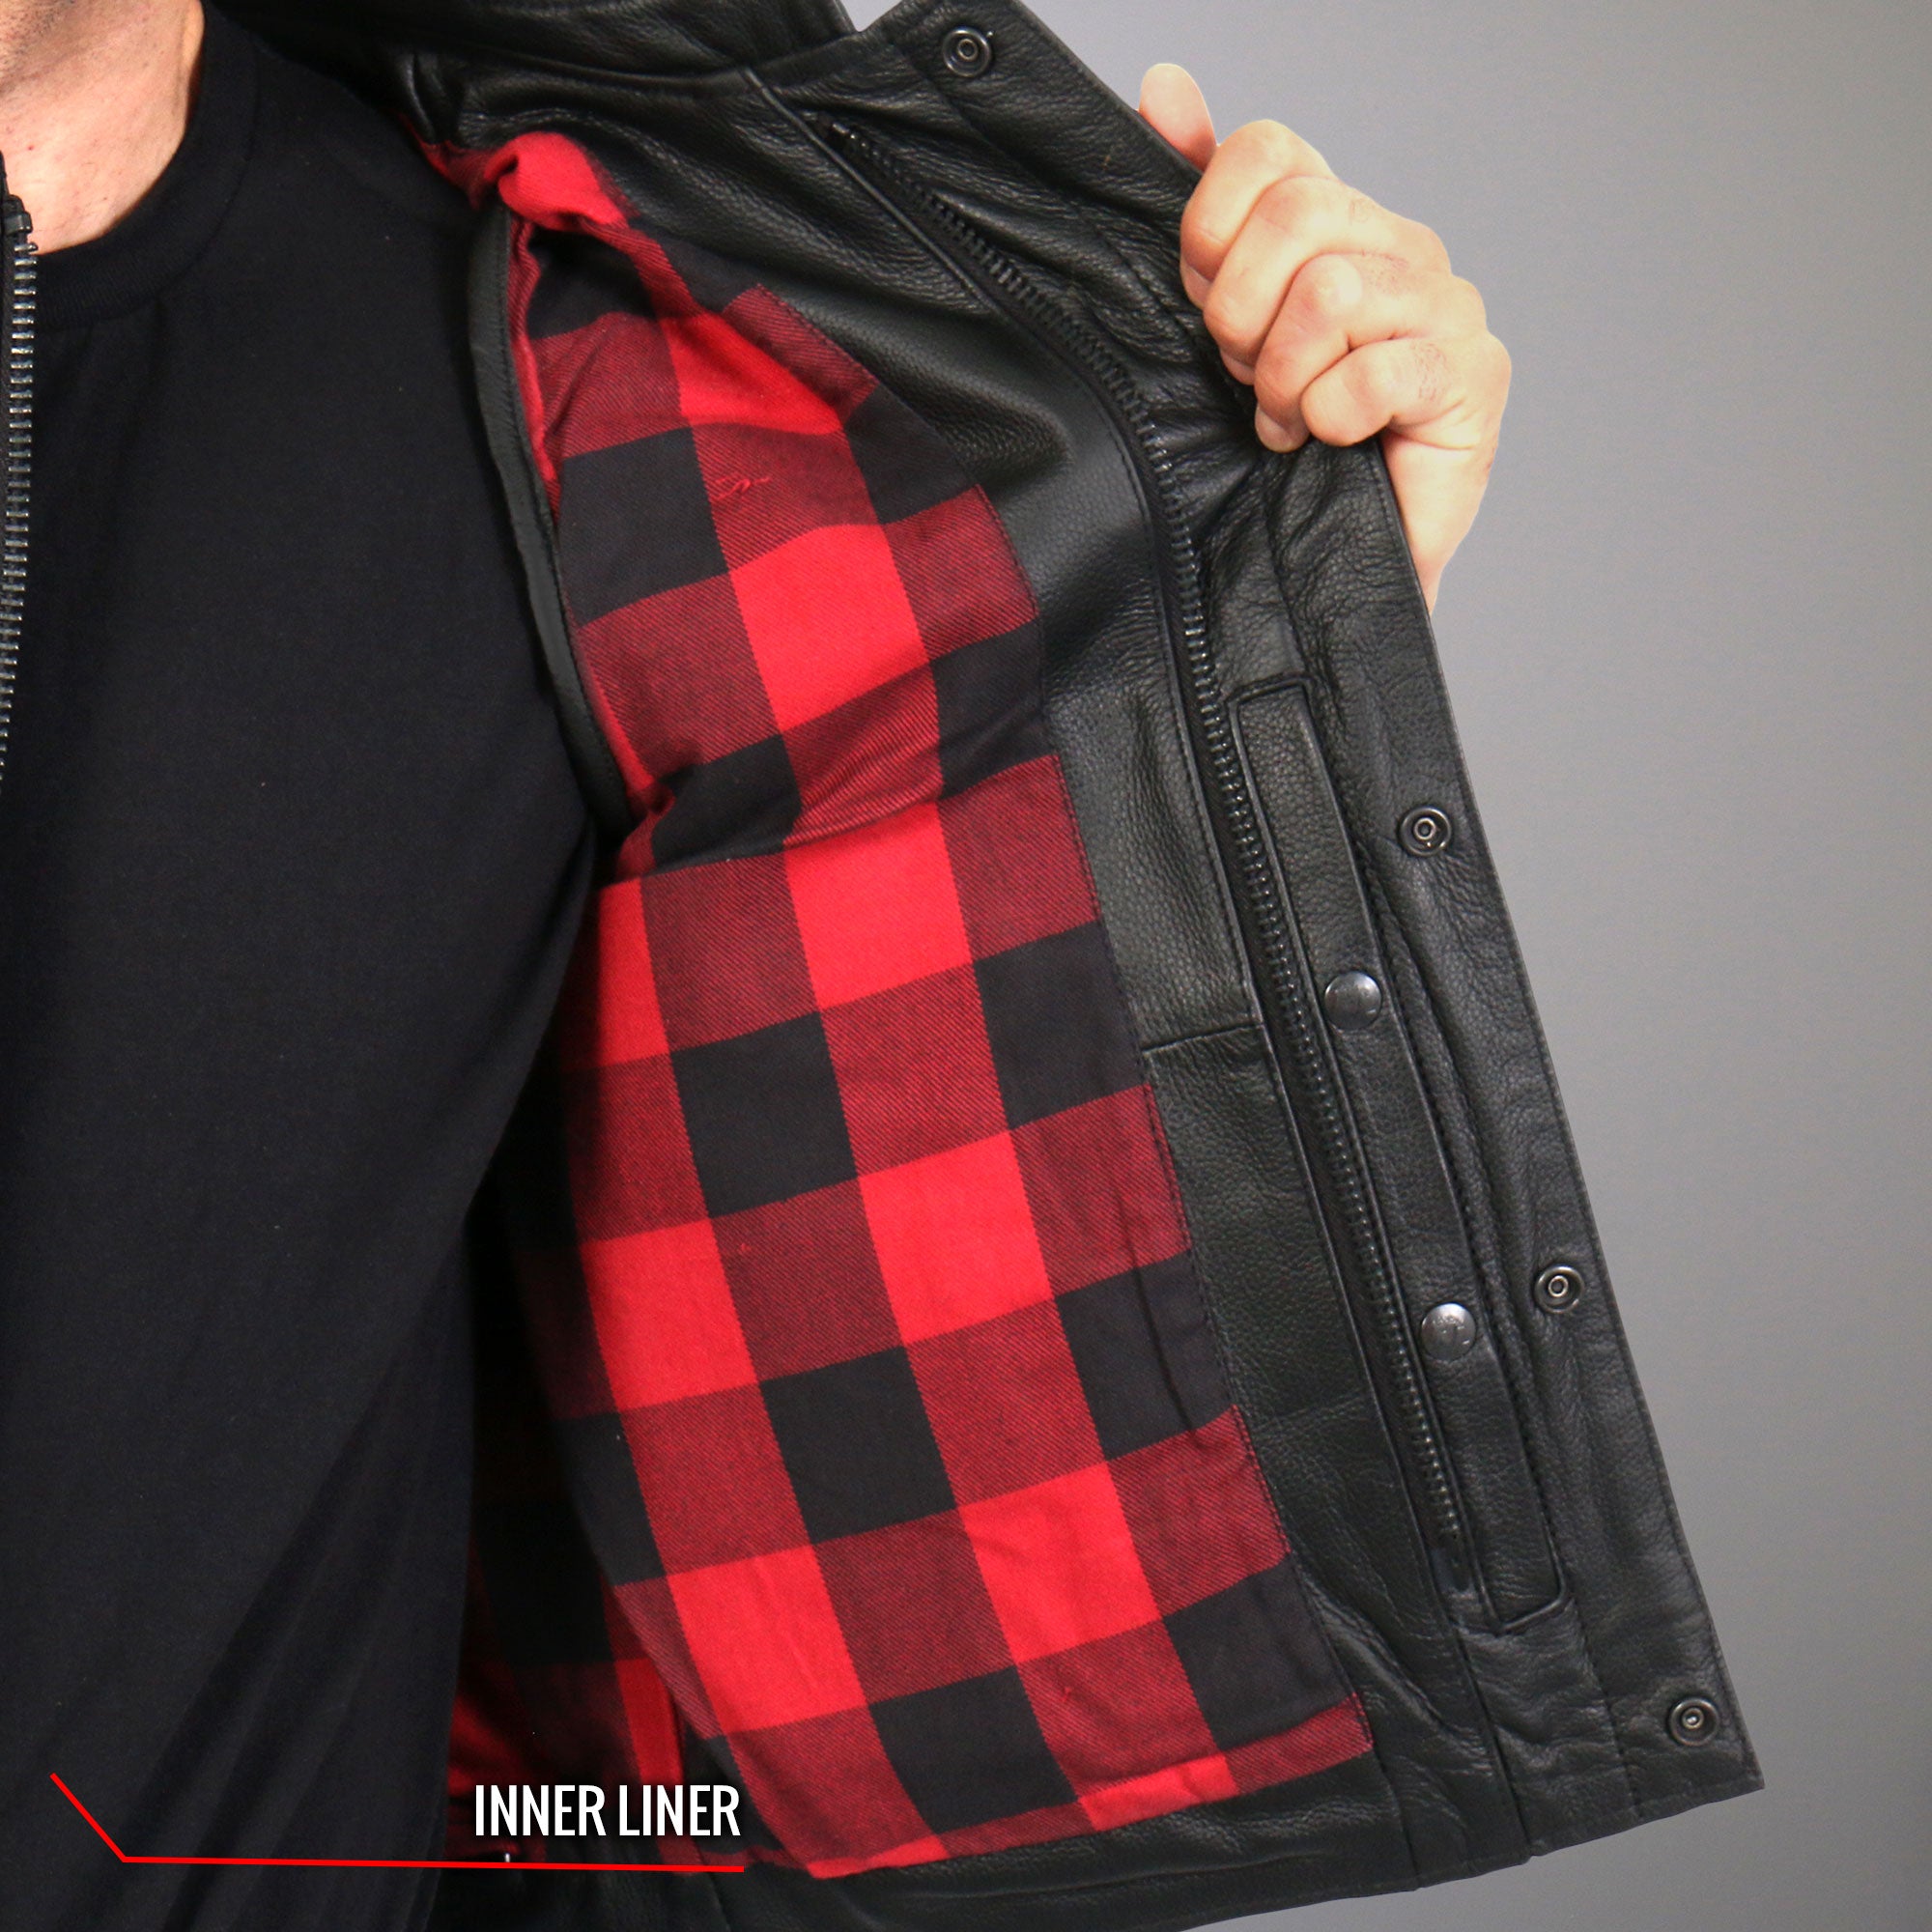 Hot Leathers VSM1060 Men's Black 'Flannel Red' Motorcycle Club Style Conceal and Carry Leather Biker Vest